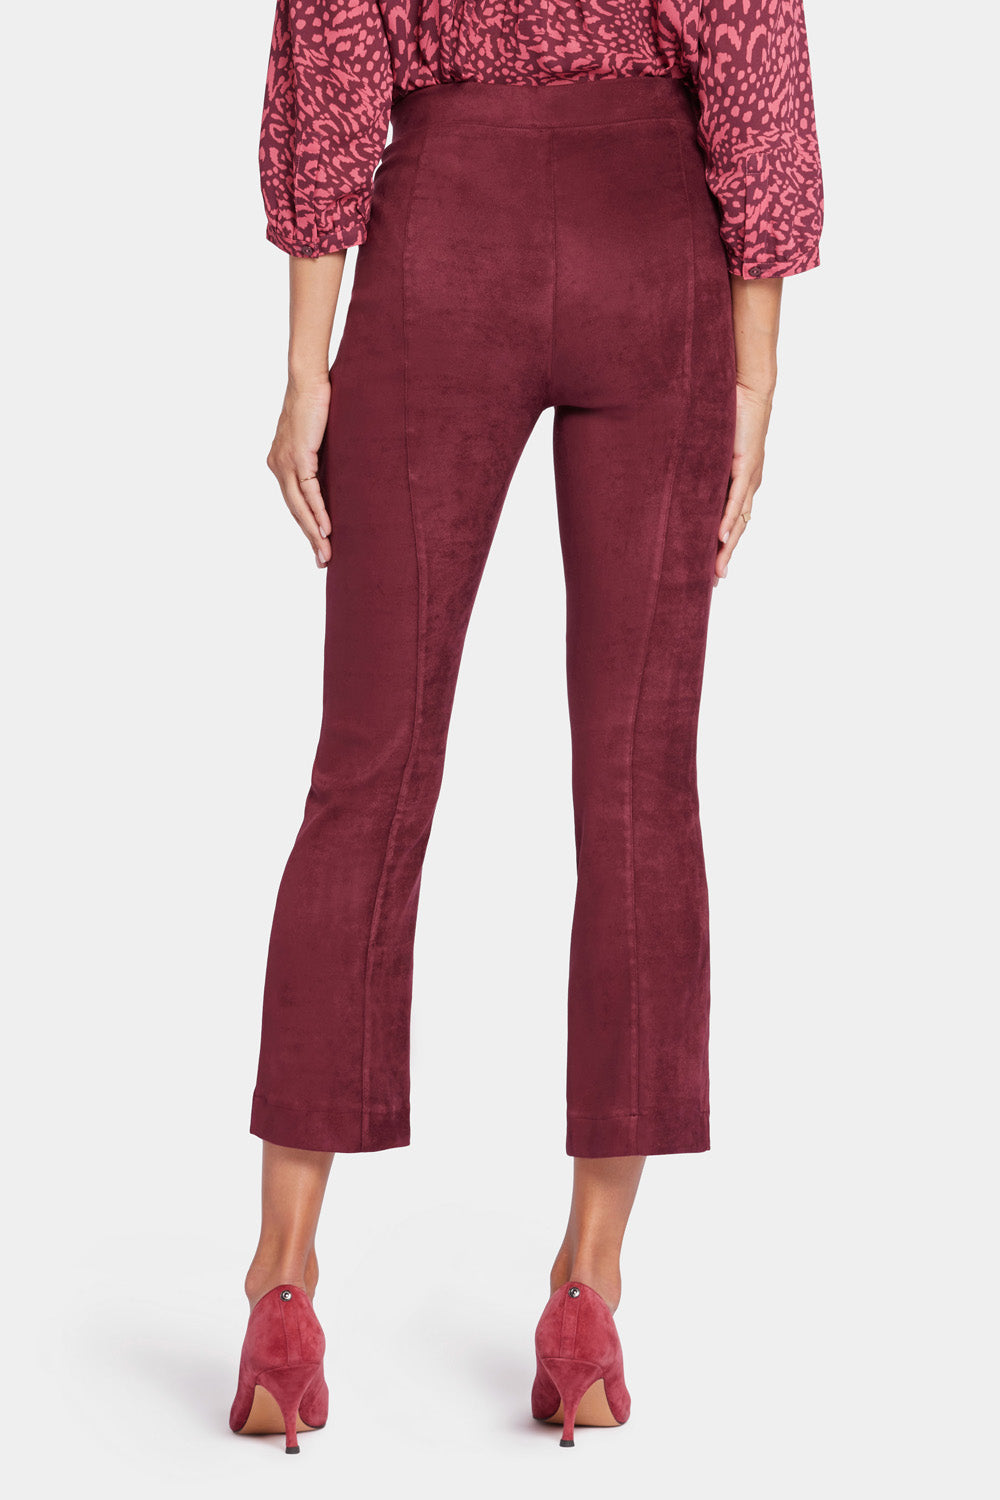 NYDJ Slim Bootcut Pull-On Pants In Stretch Faux Suede - Dark Cherry